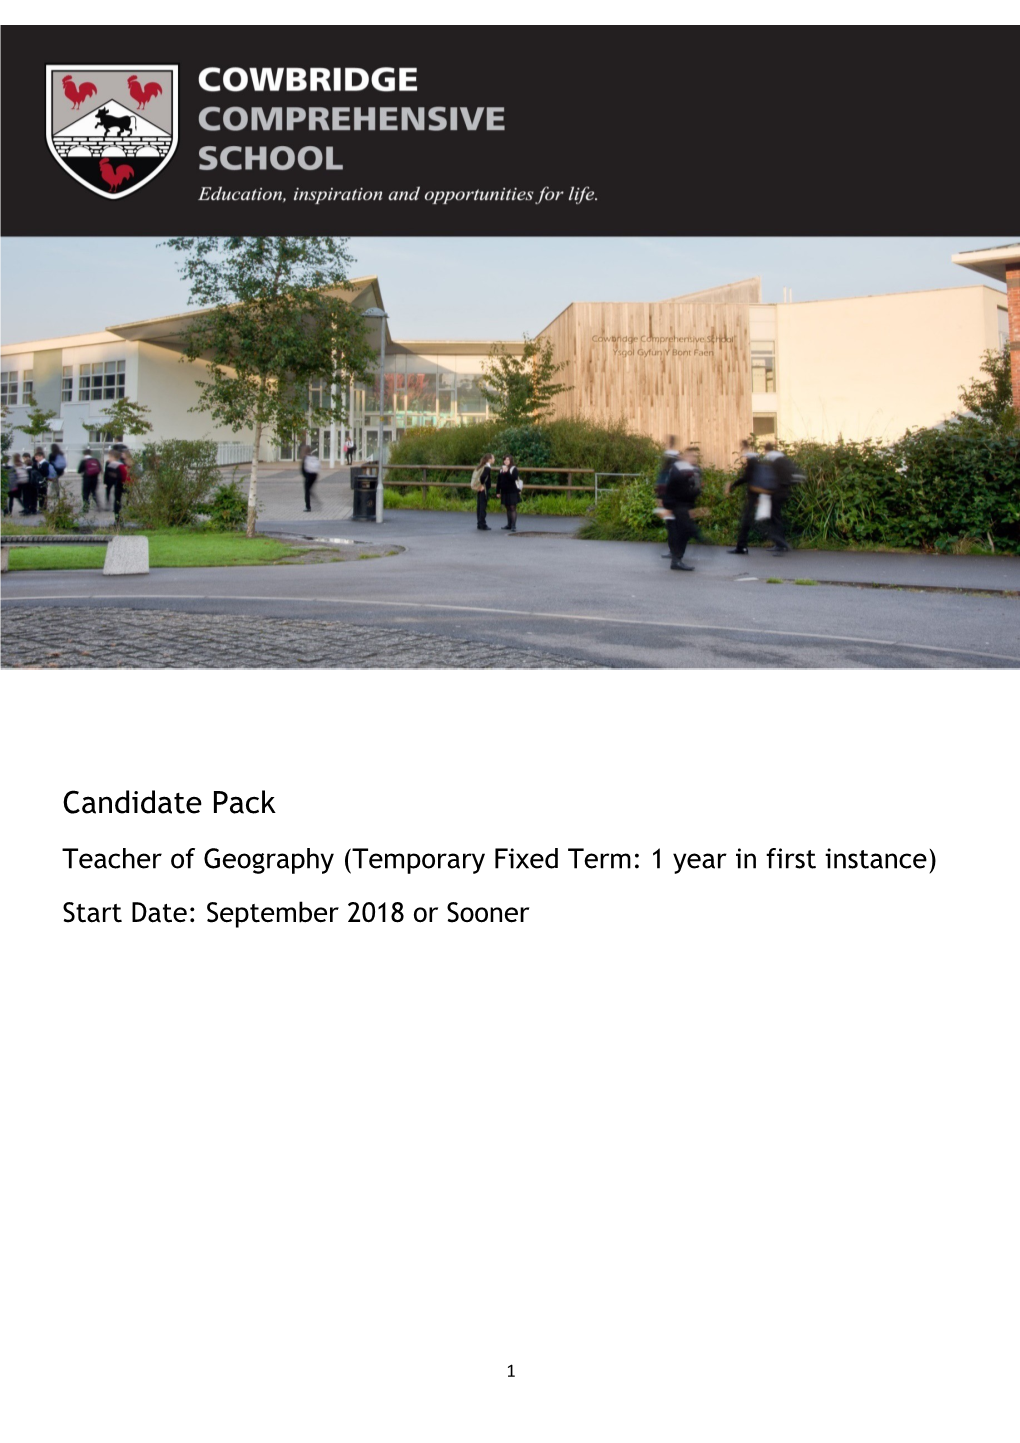 Teacher of Geography (Temporary Fixed Term: 1 Year in First Instance)